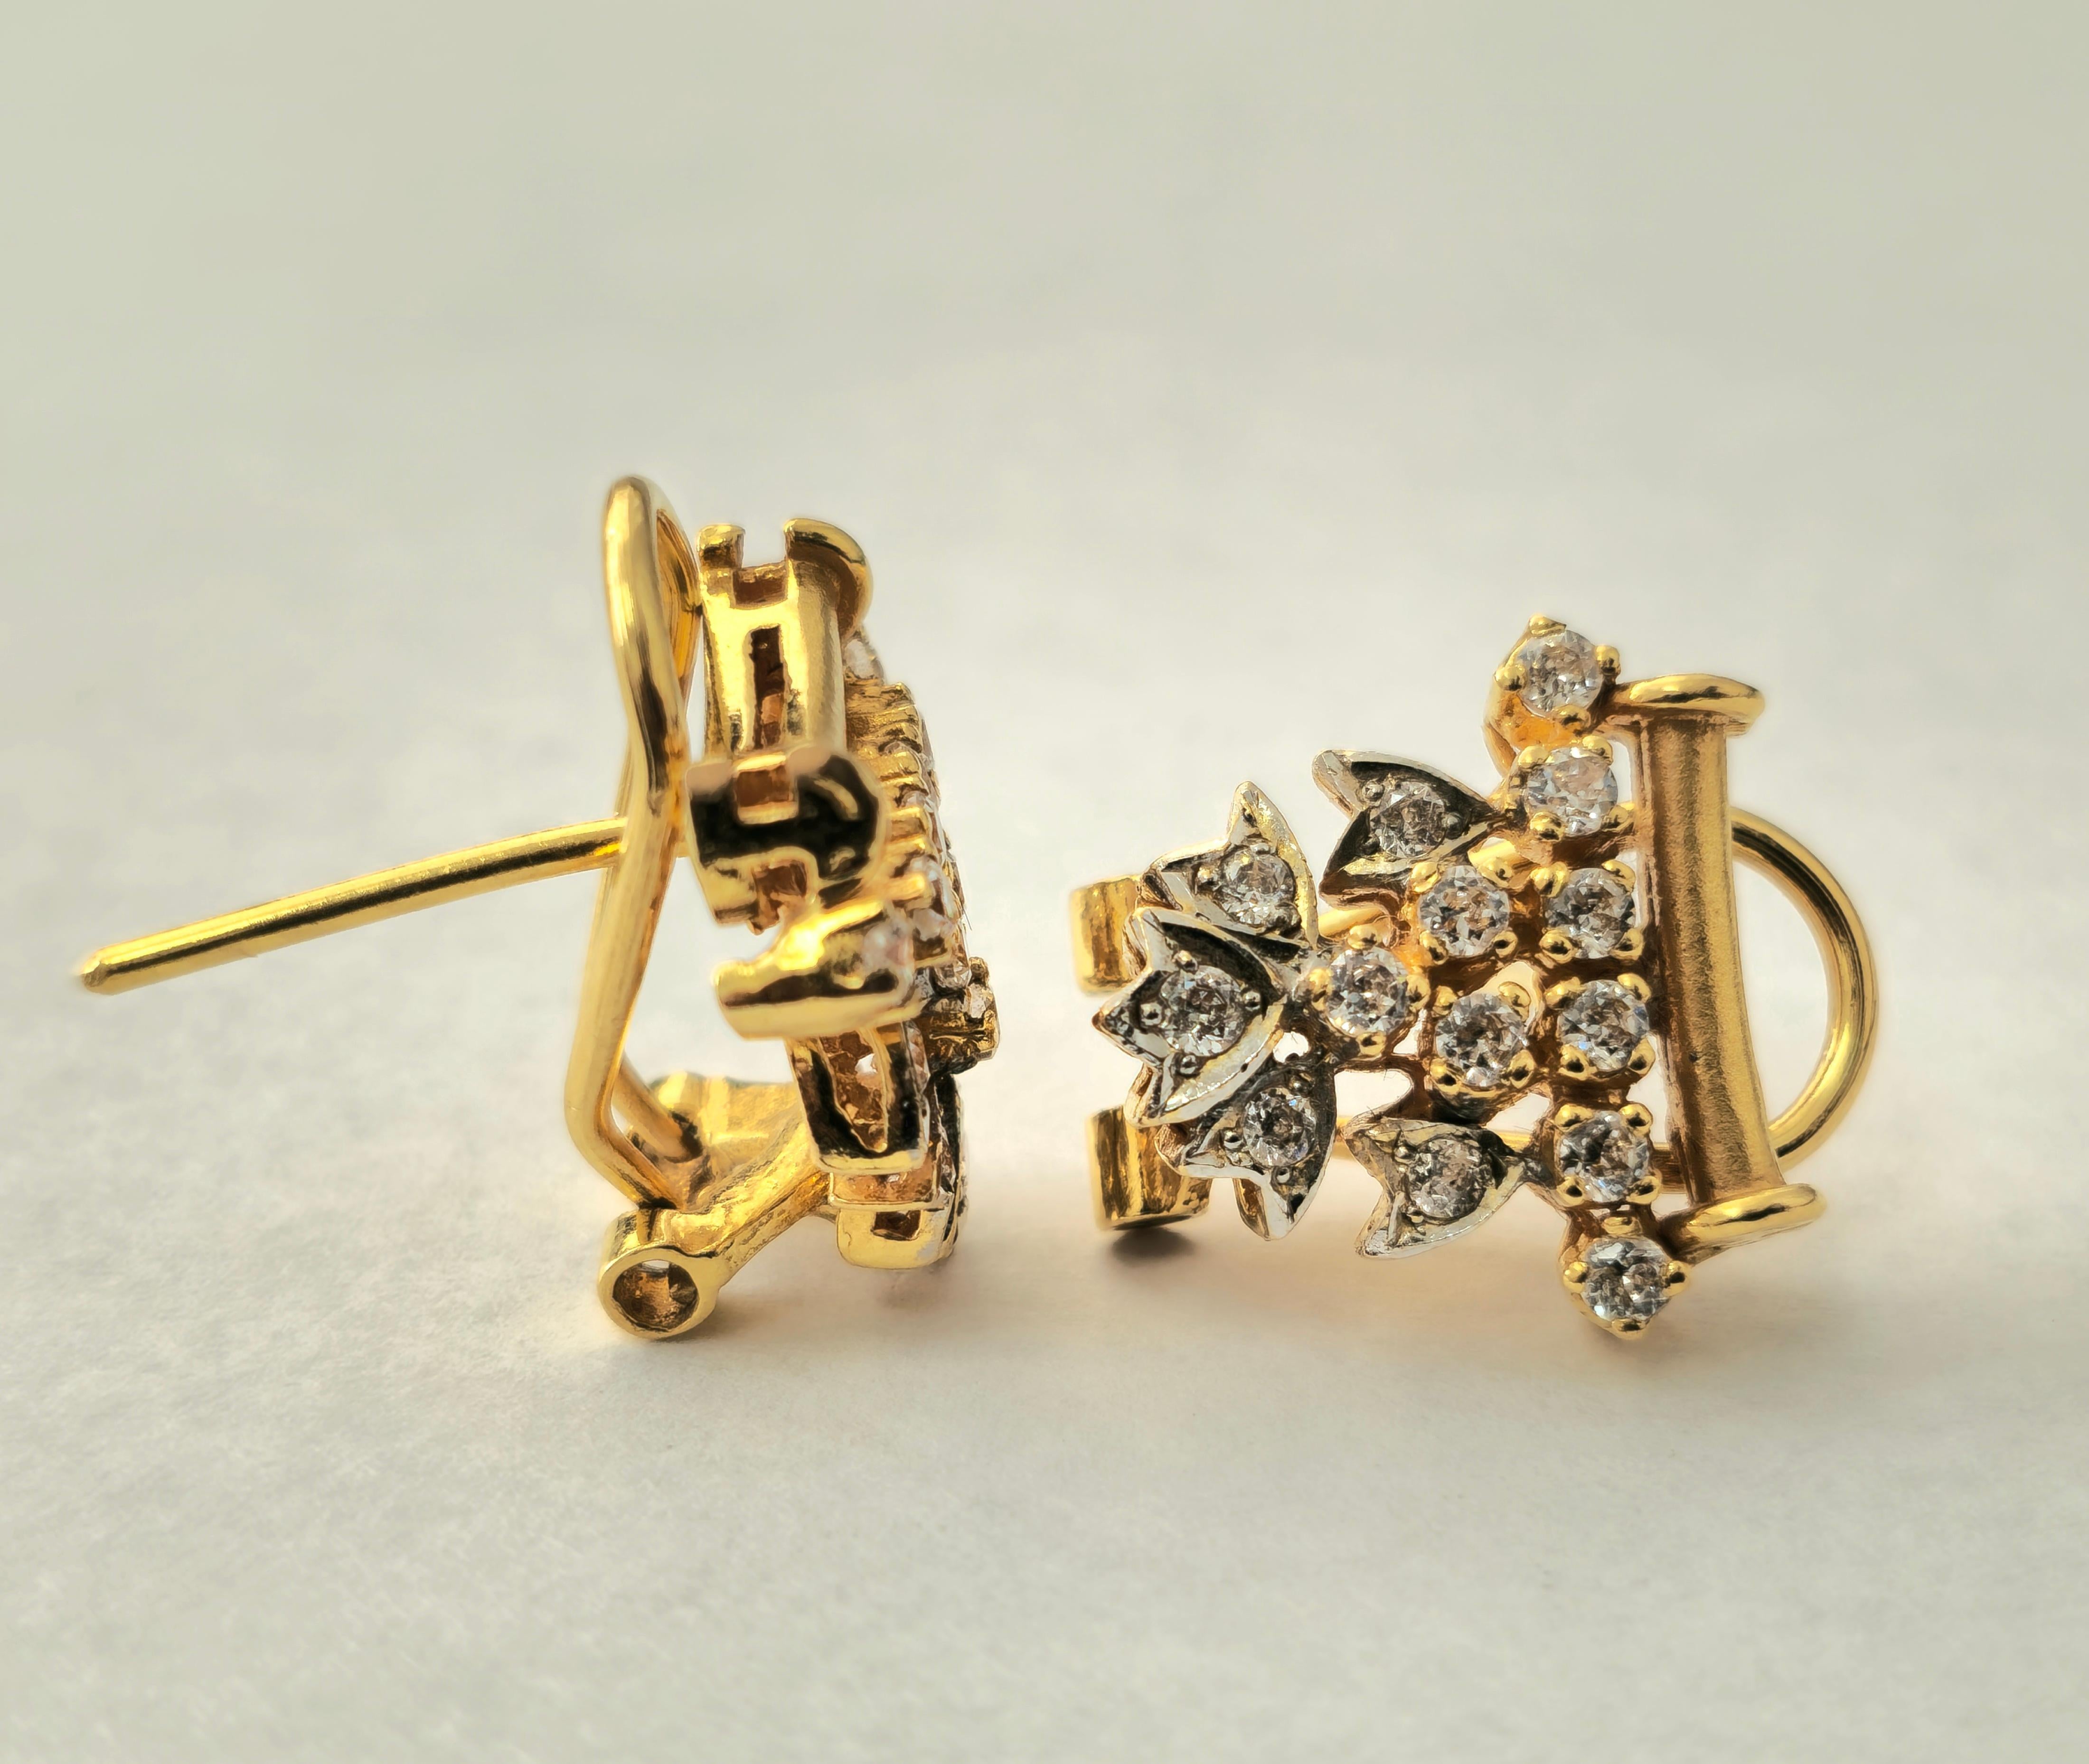 0.83 Carat Diamond Earrings in 18k Gold In Excellent Condition For Sale In Miami, FL